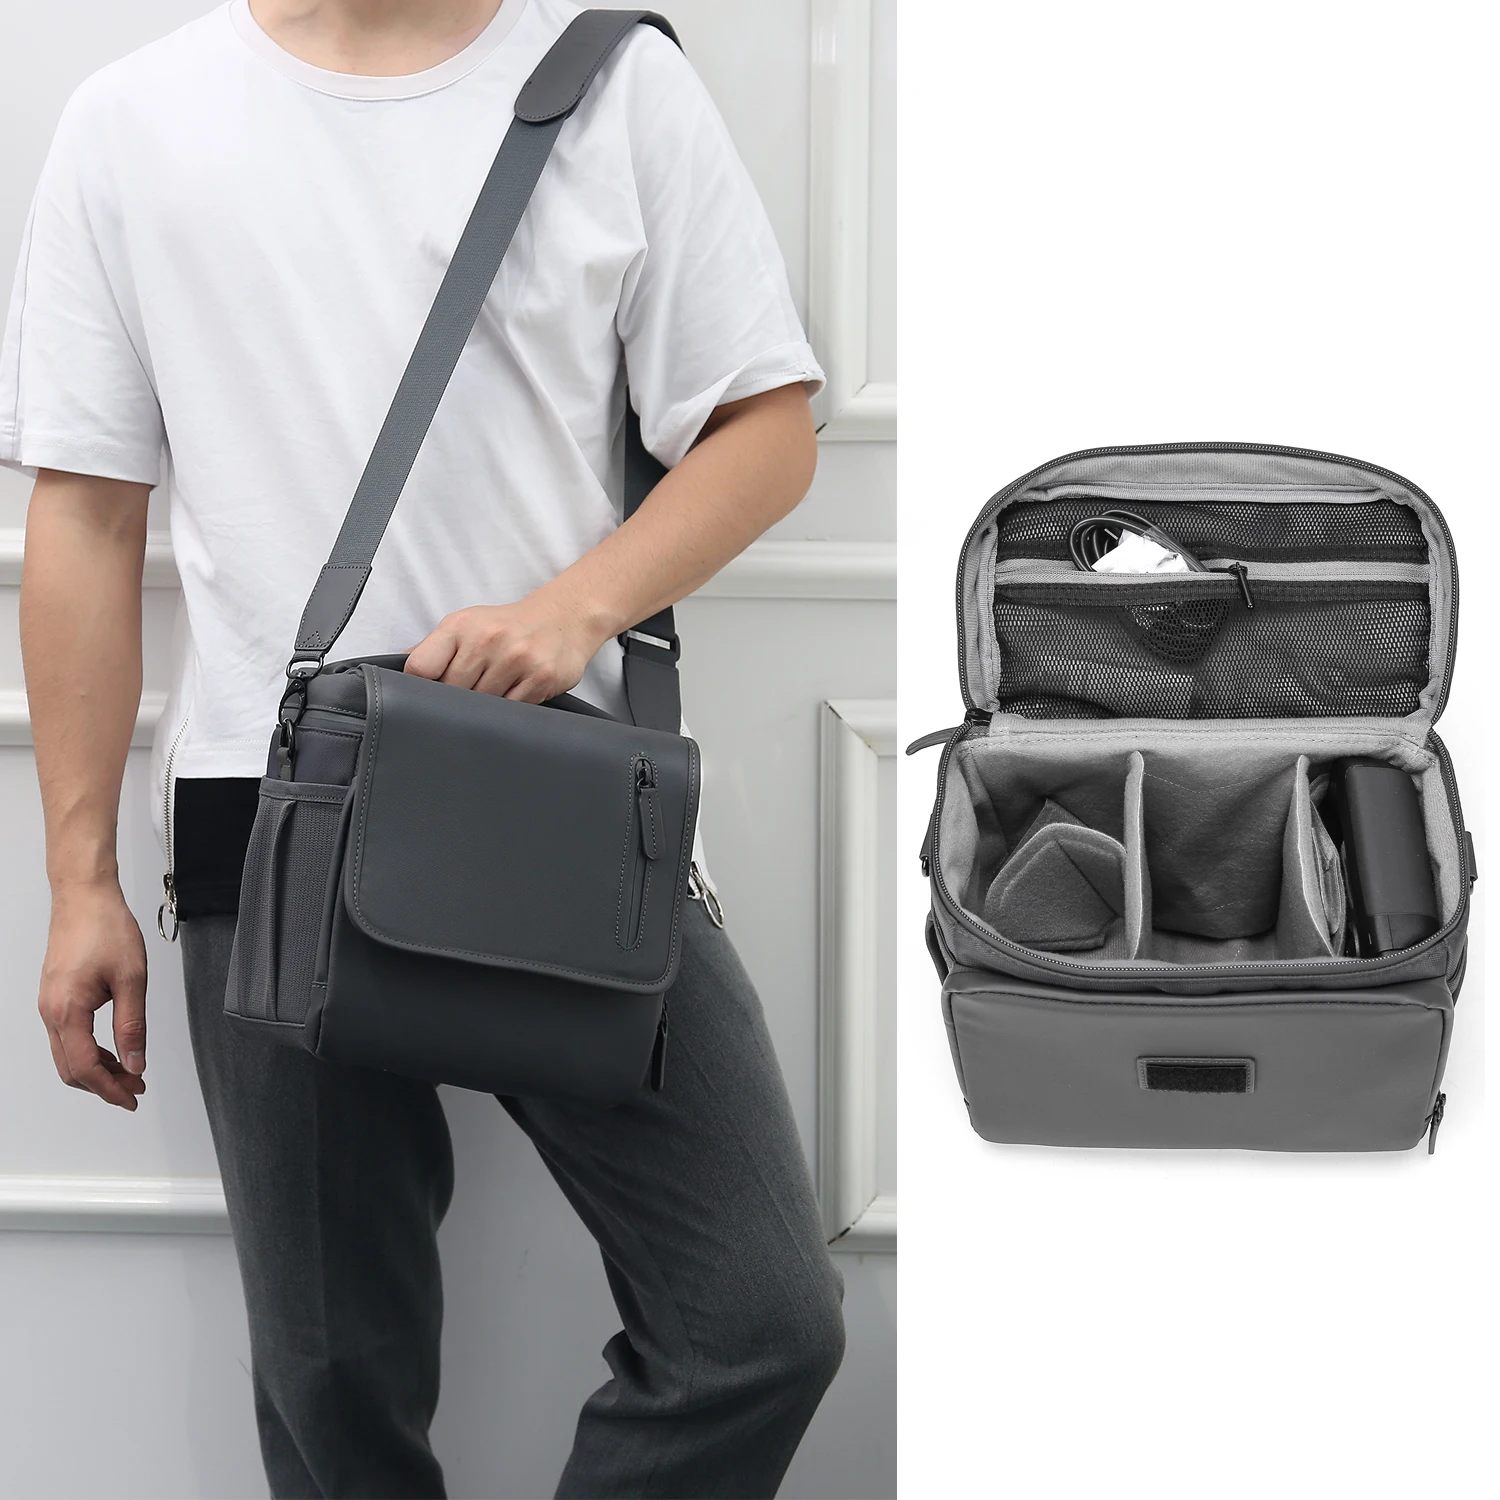 

SUNNYLIFE Travel Portable Protective Storage Carrying Case Shoulder Bag for DJI Mavic 2 Pro Zoom Smart Controller Accessories